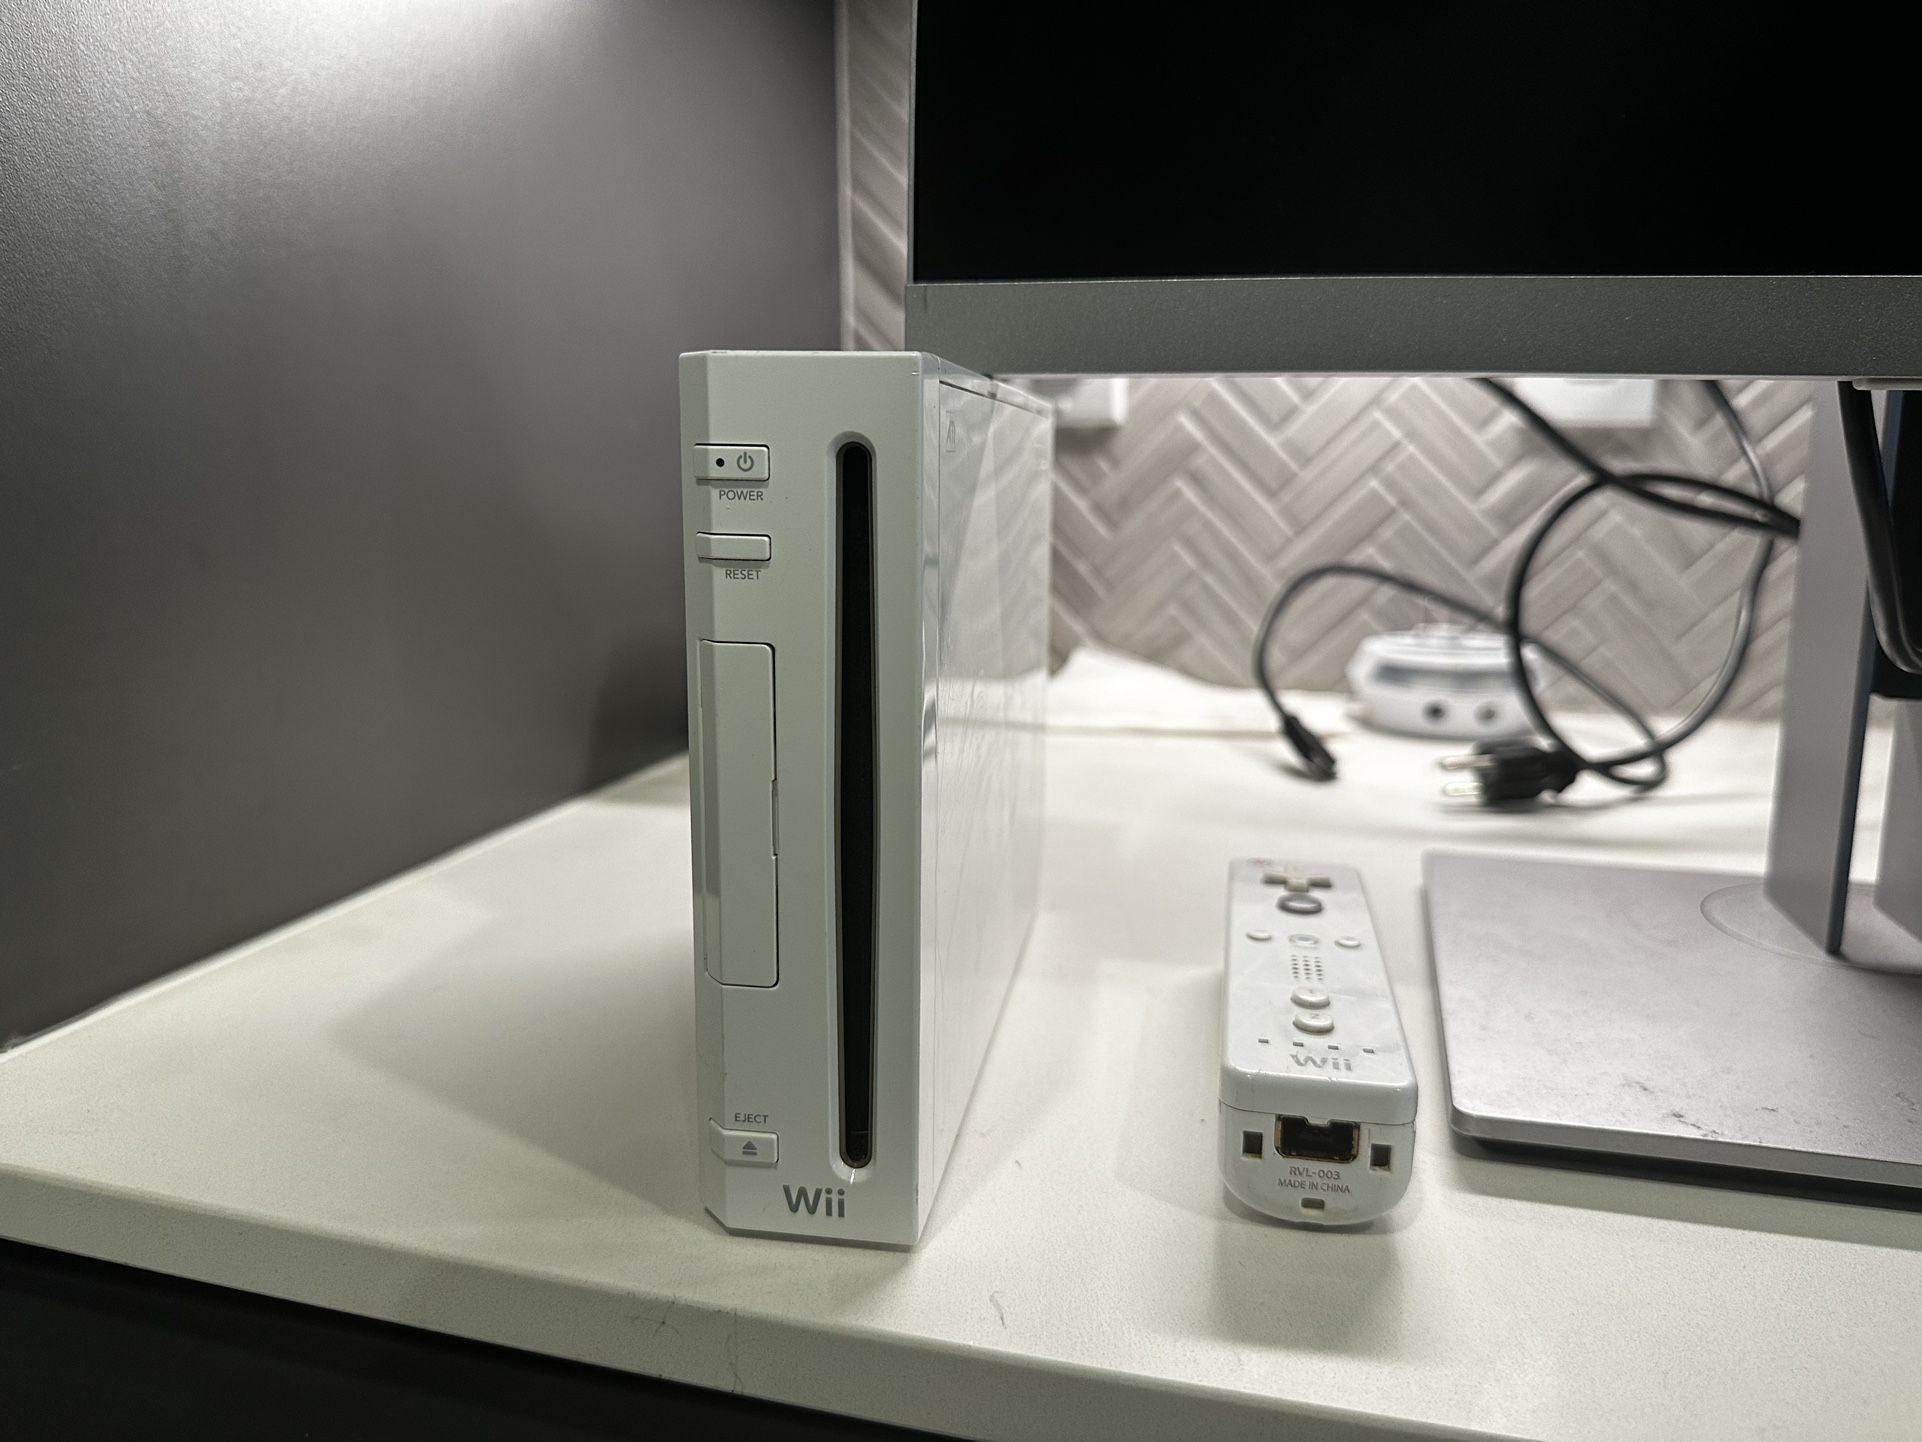 Nintendo Wii included with HP Monitor